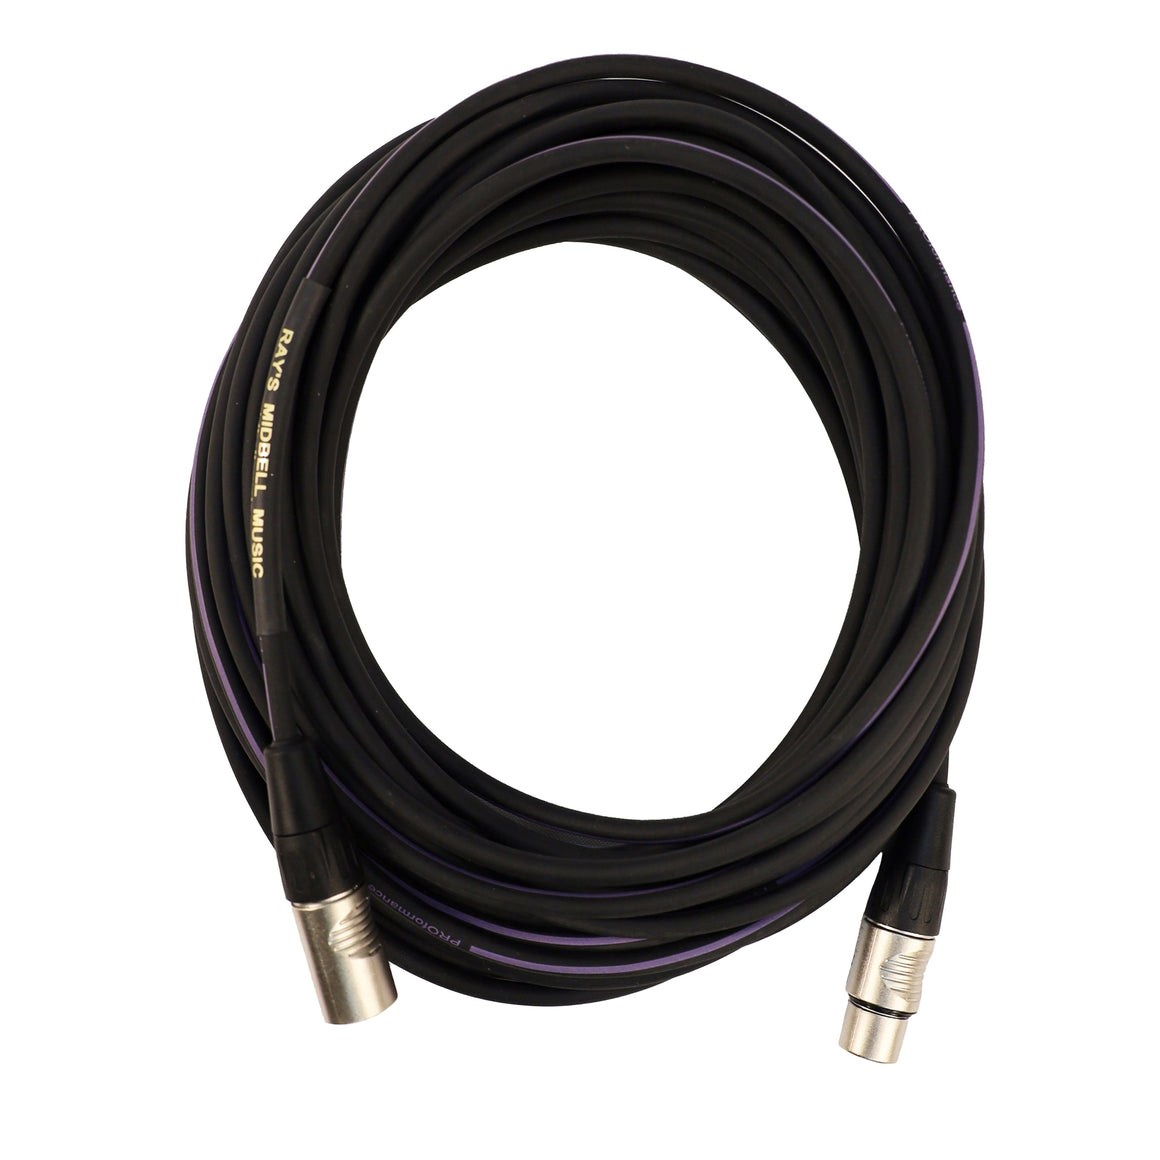 PROformance AJP50 50' Microphone Cable